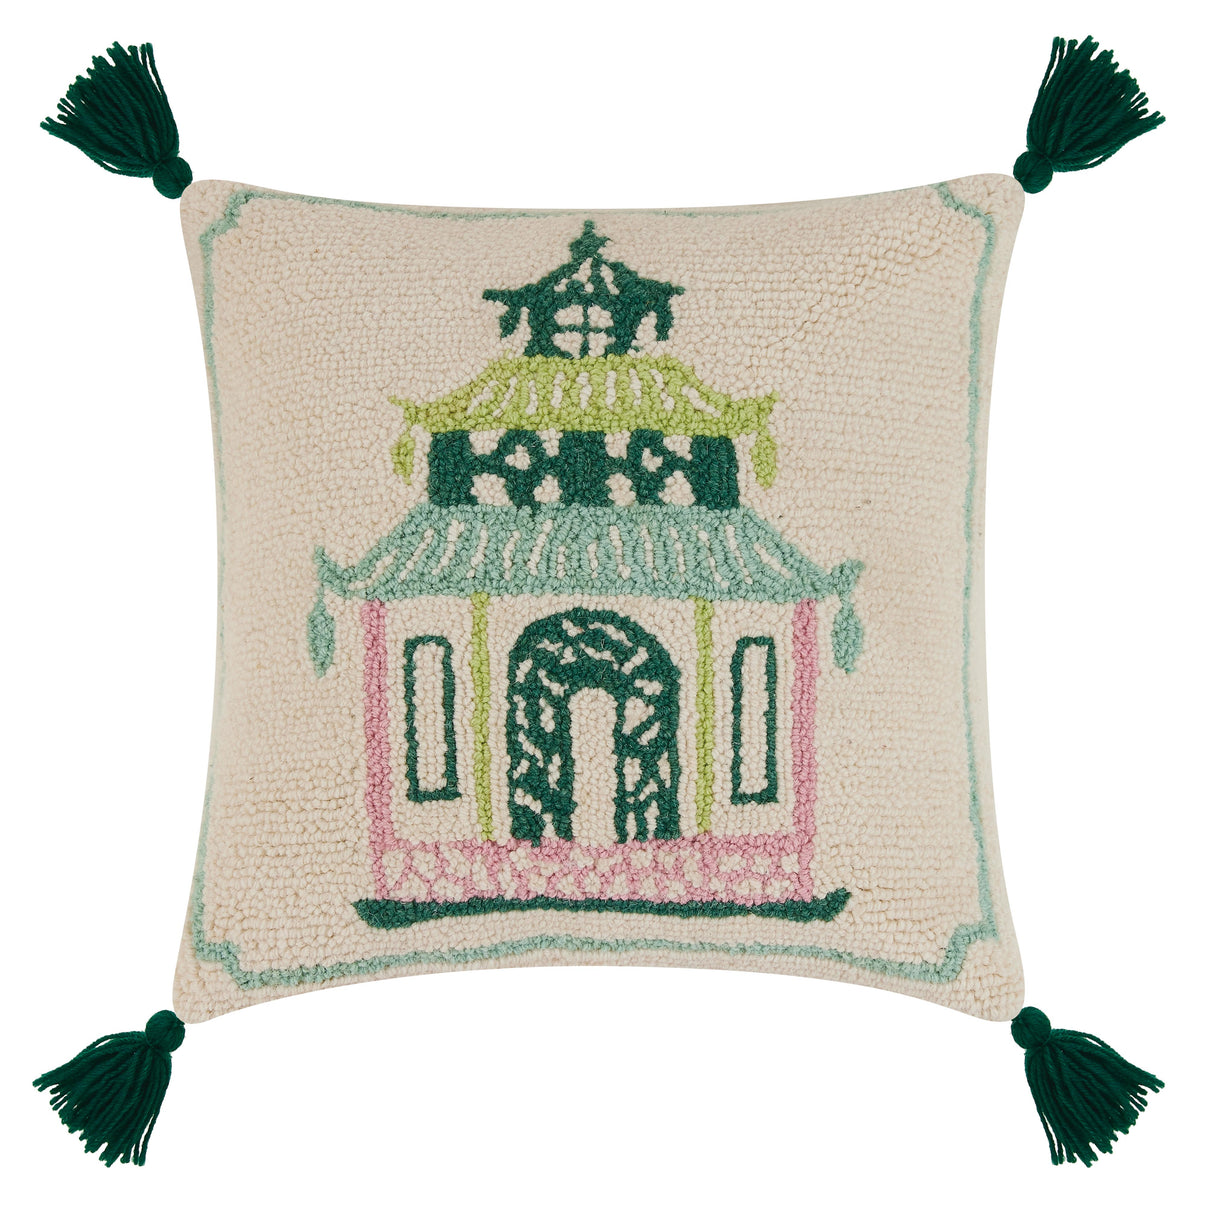 Oh, Pagoda Hooked Wool Pillow with Green Tassels